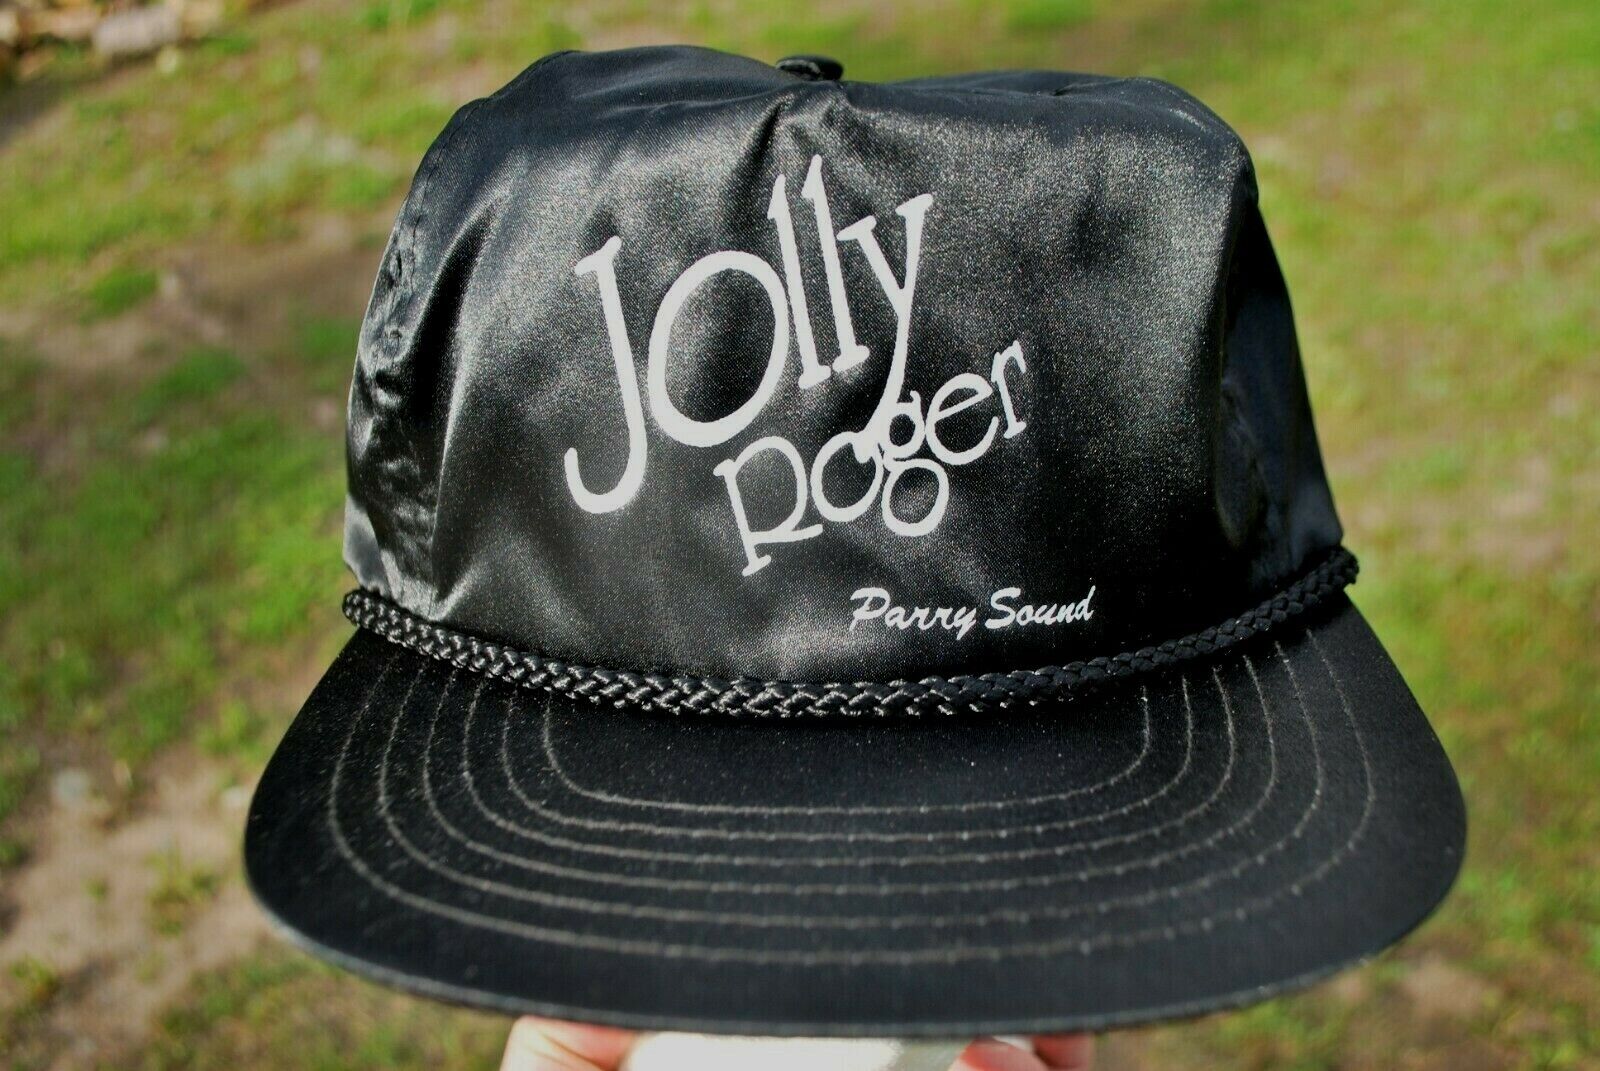 JOLLY ROGER PARRY SOUND VINTAGE HAT ROPE CORD KP CAP CO. UNUSED NEW